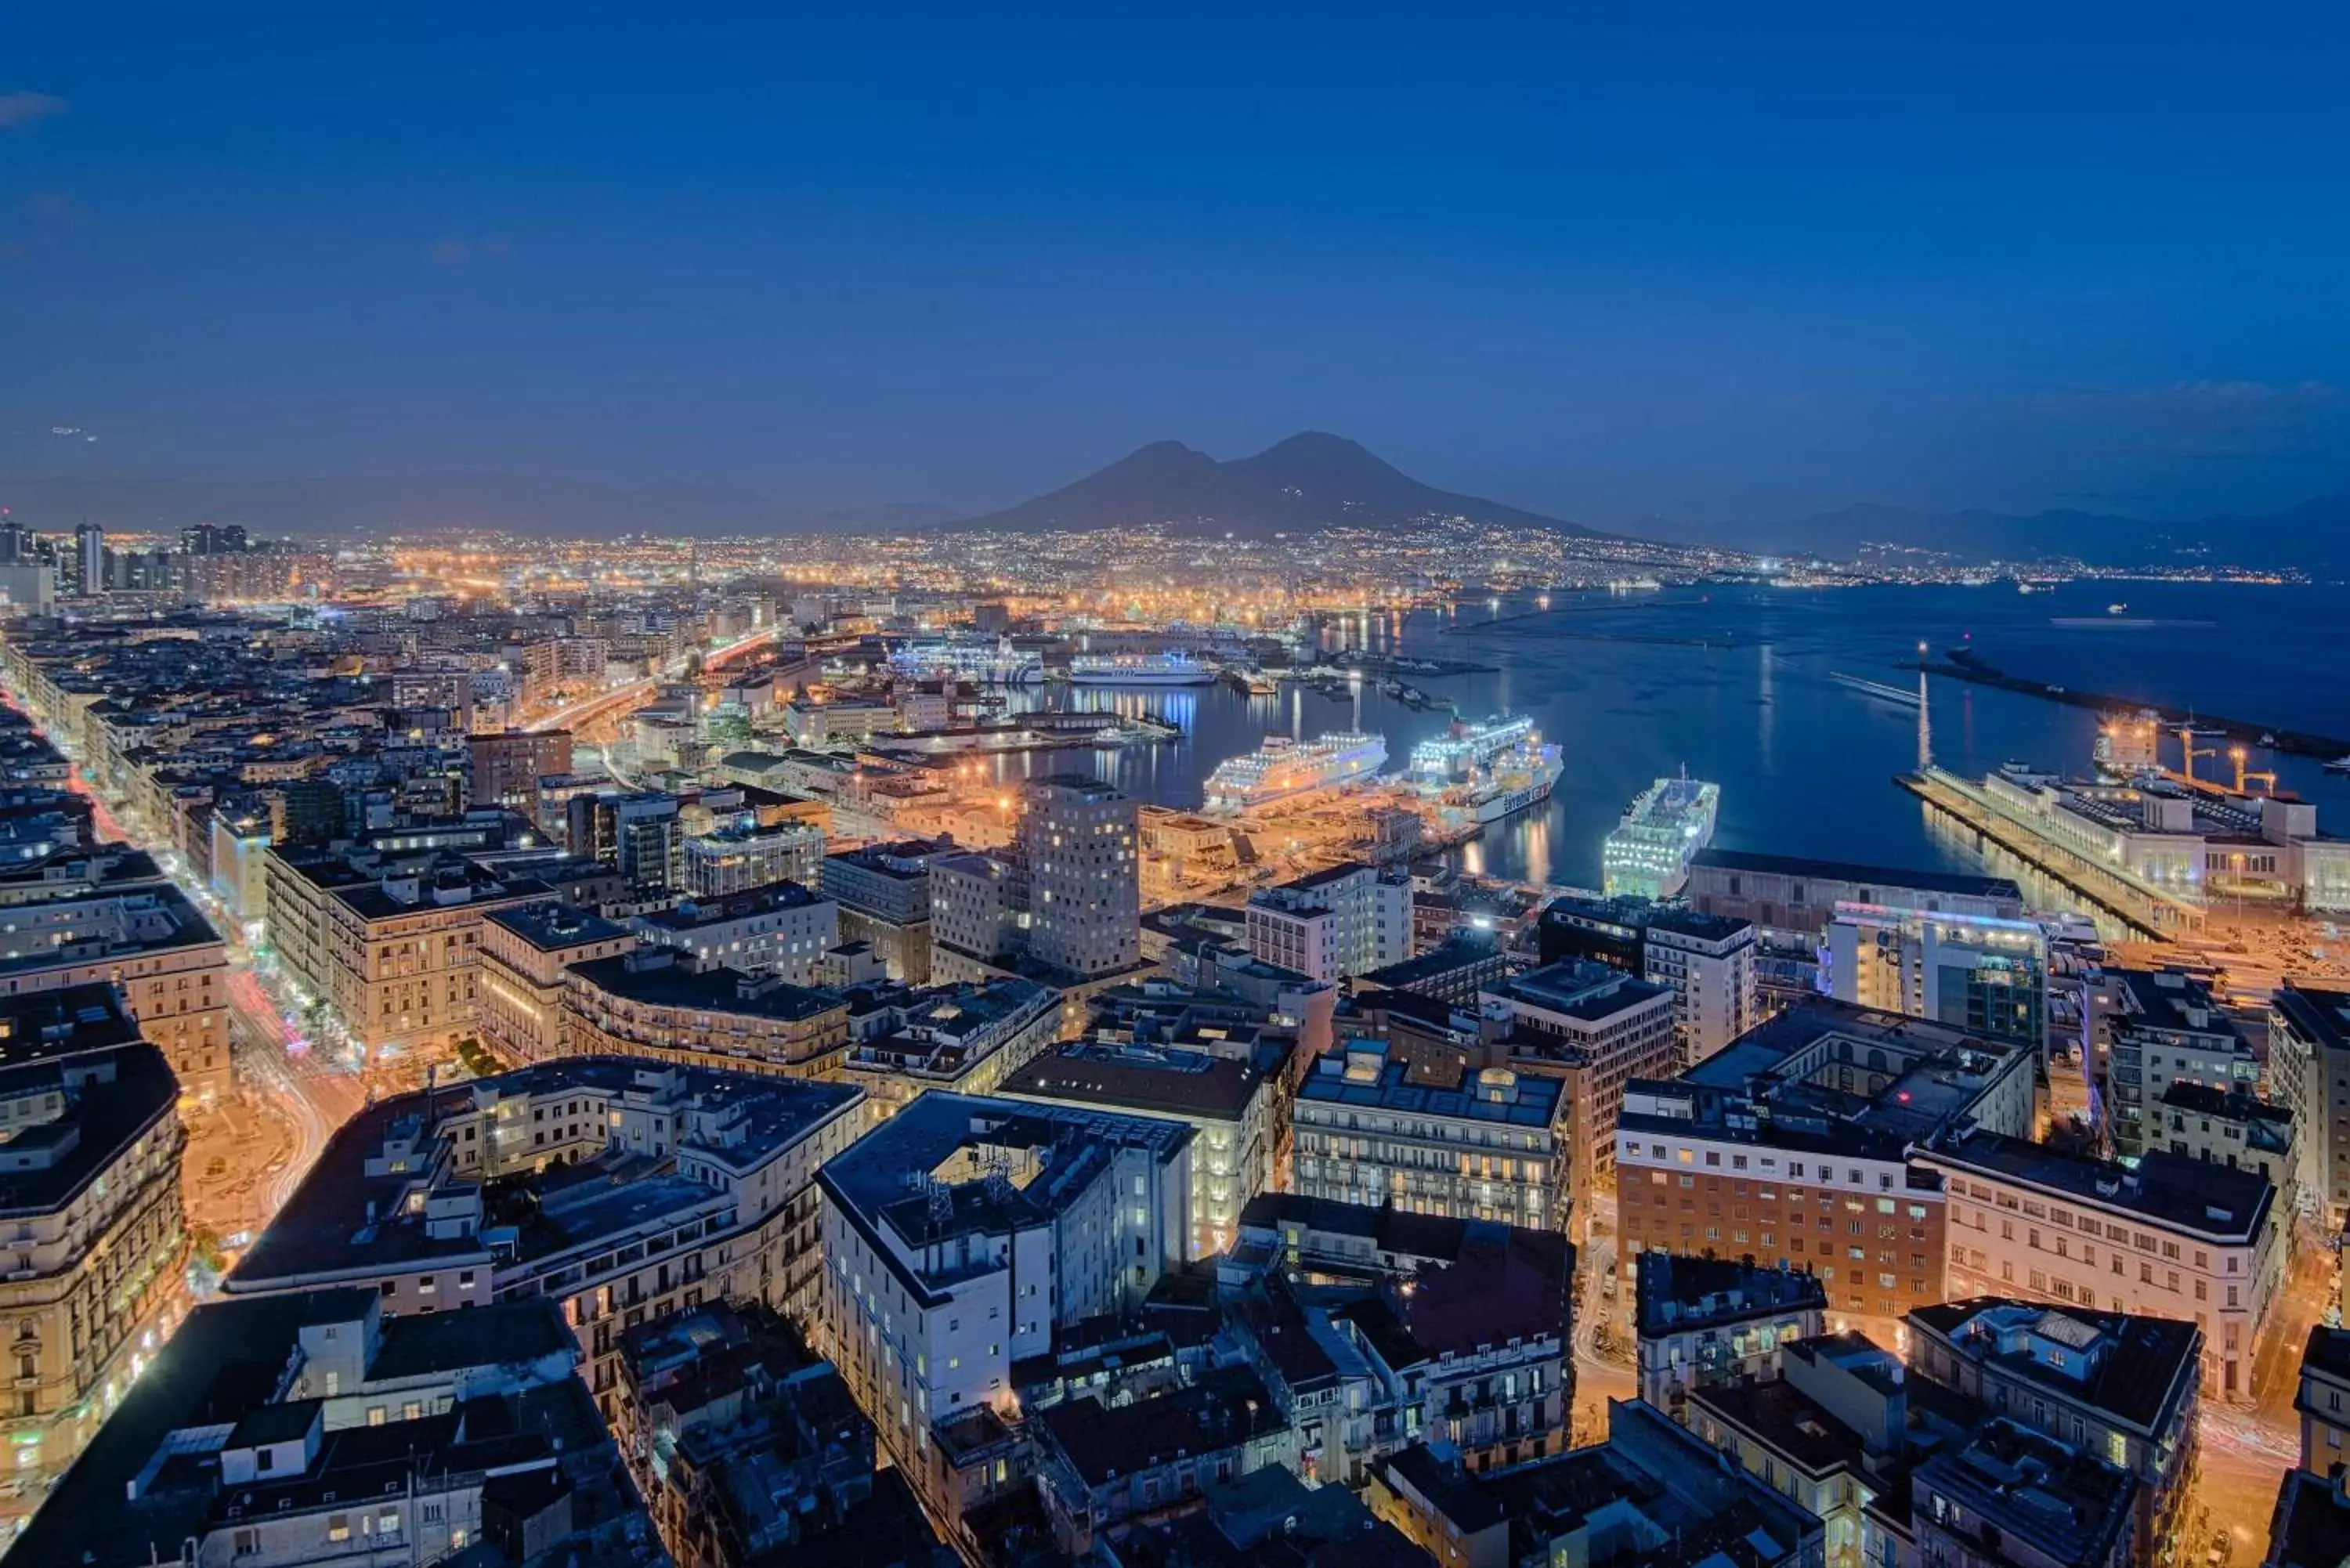 On site, Bird's-eye View in NH Napoli Panorama